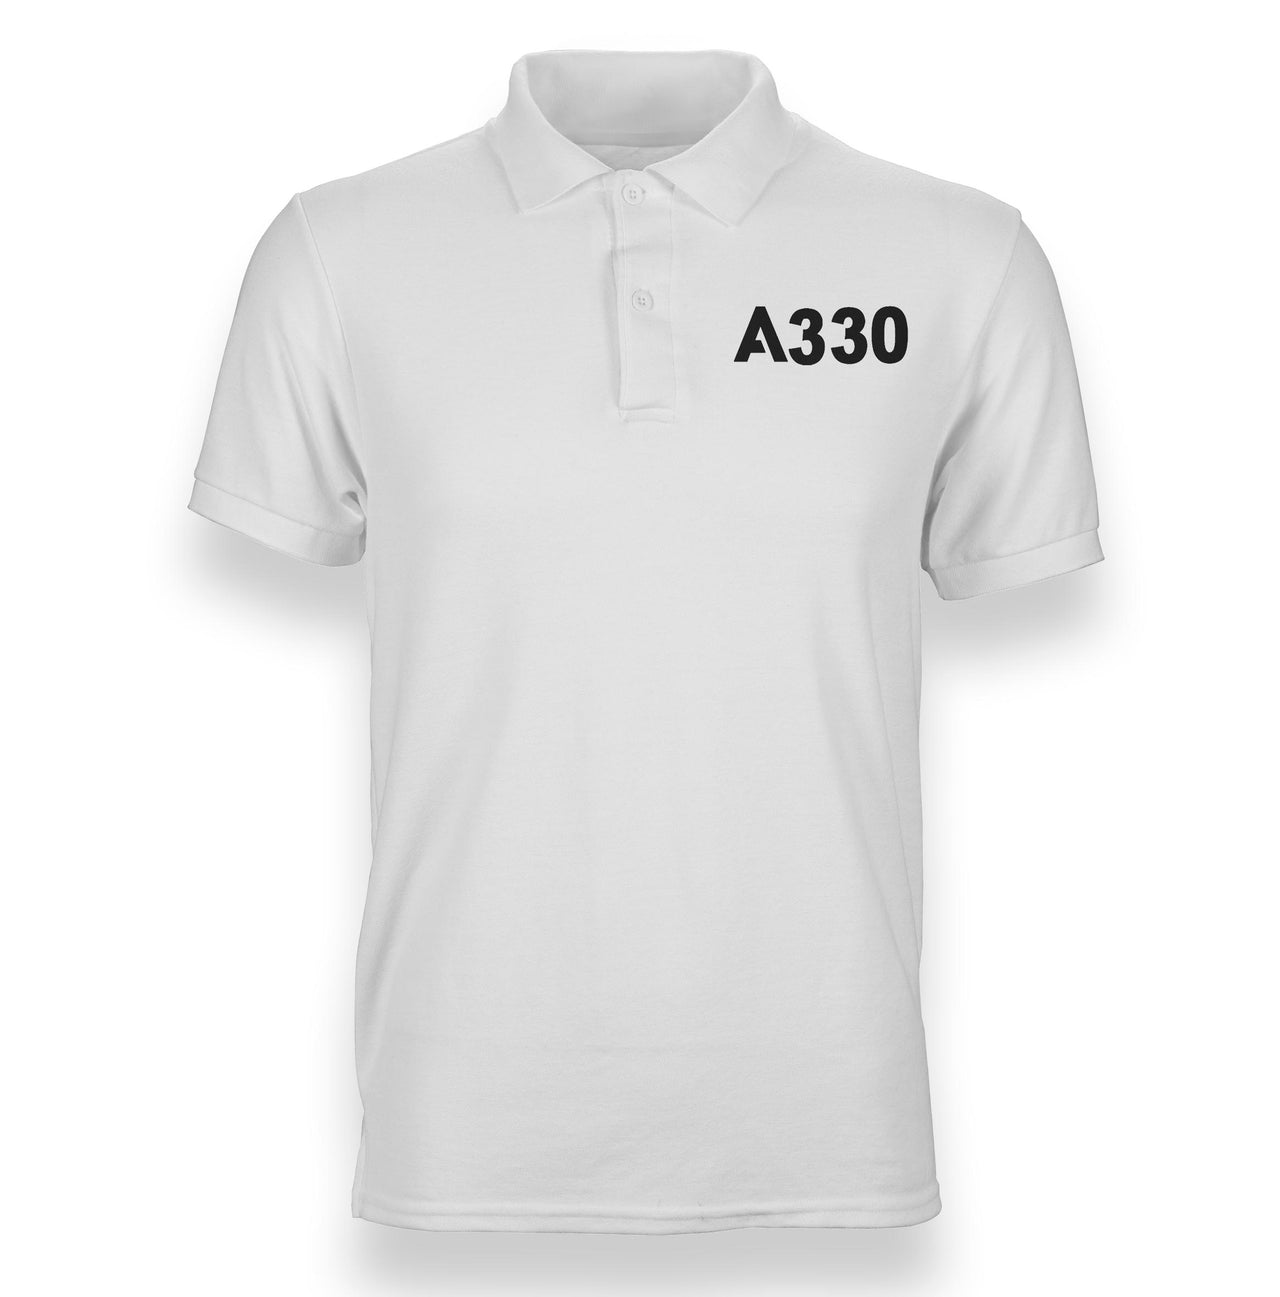 A330 Flat Text Designed Polo T-Shirts